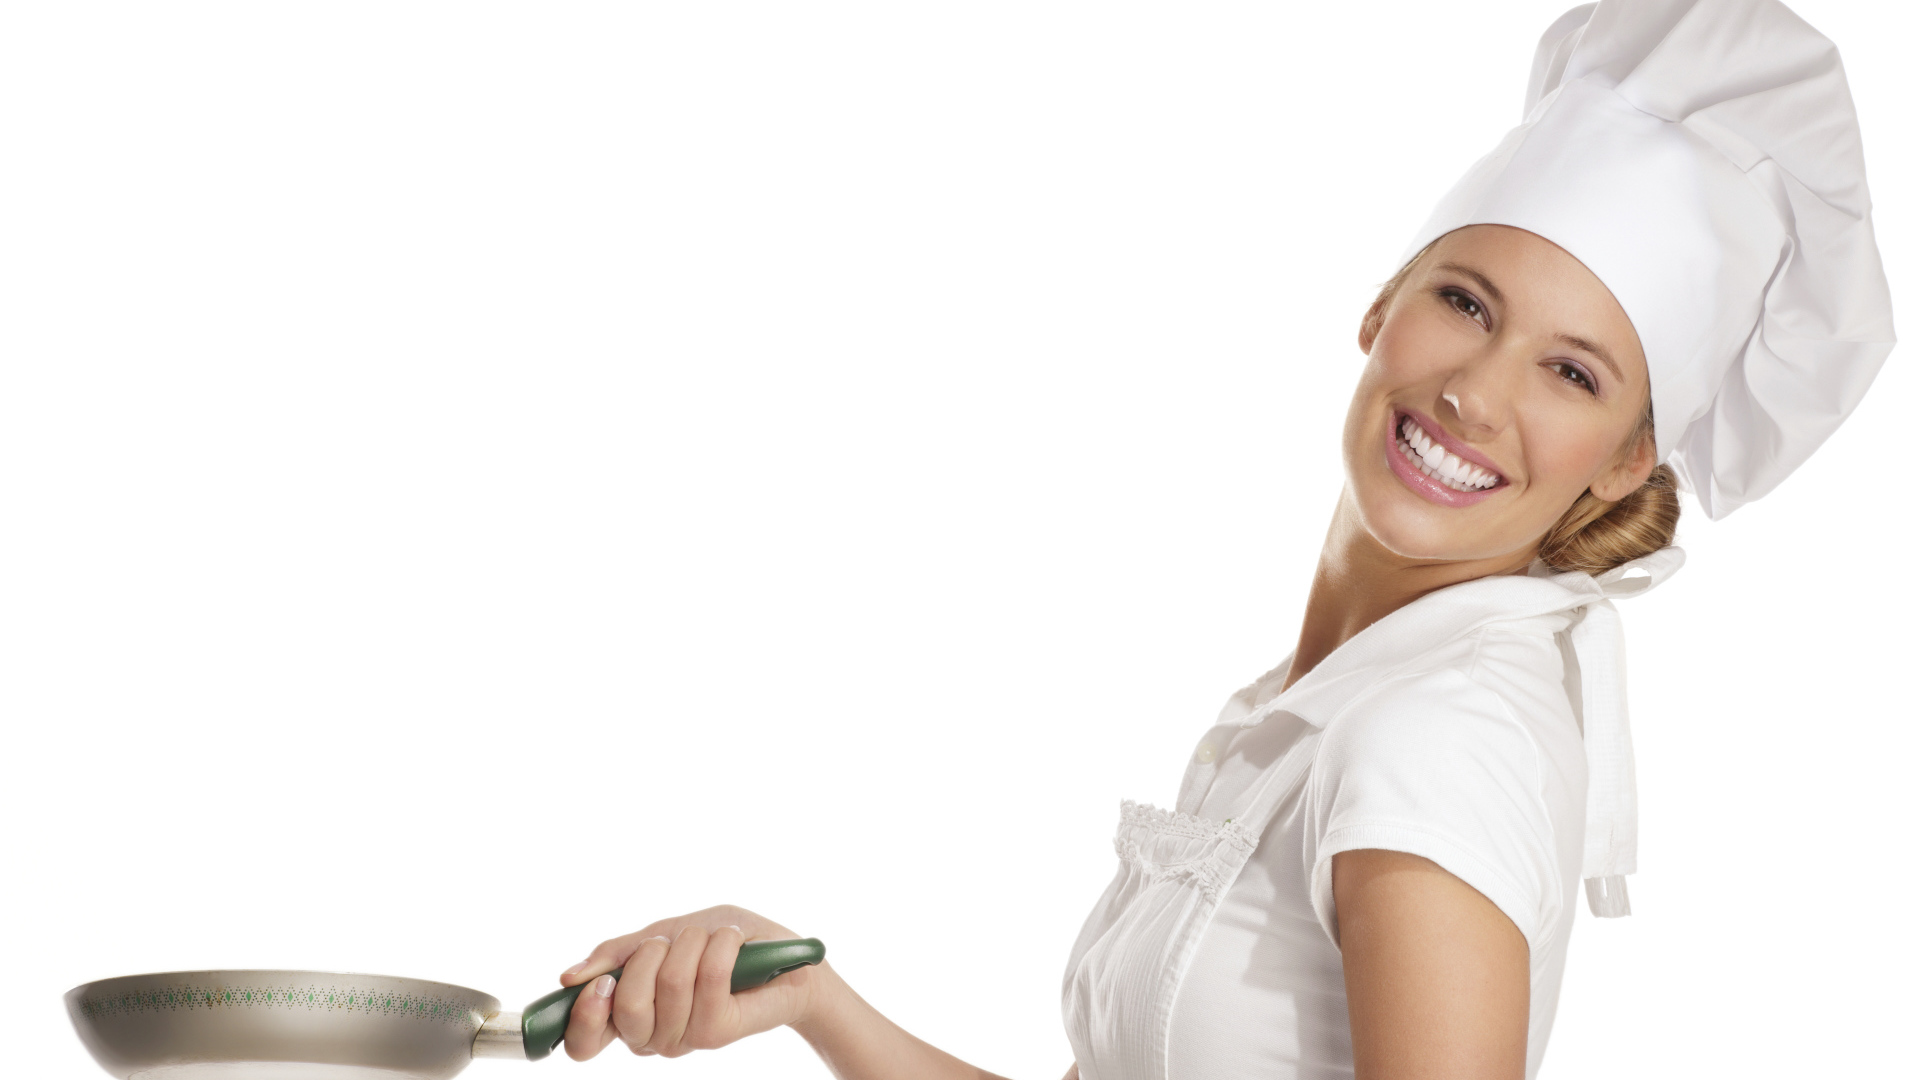 Smiling cook girl with a griddle in hand on white background